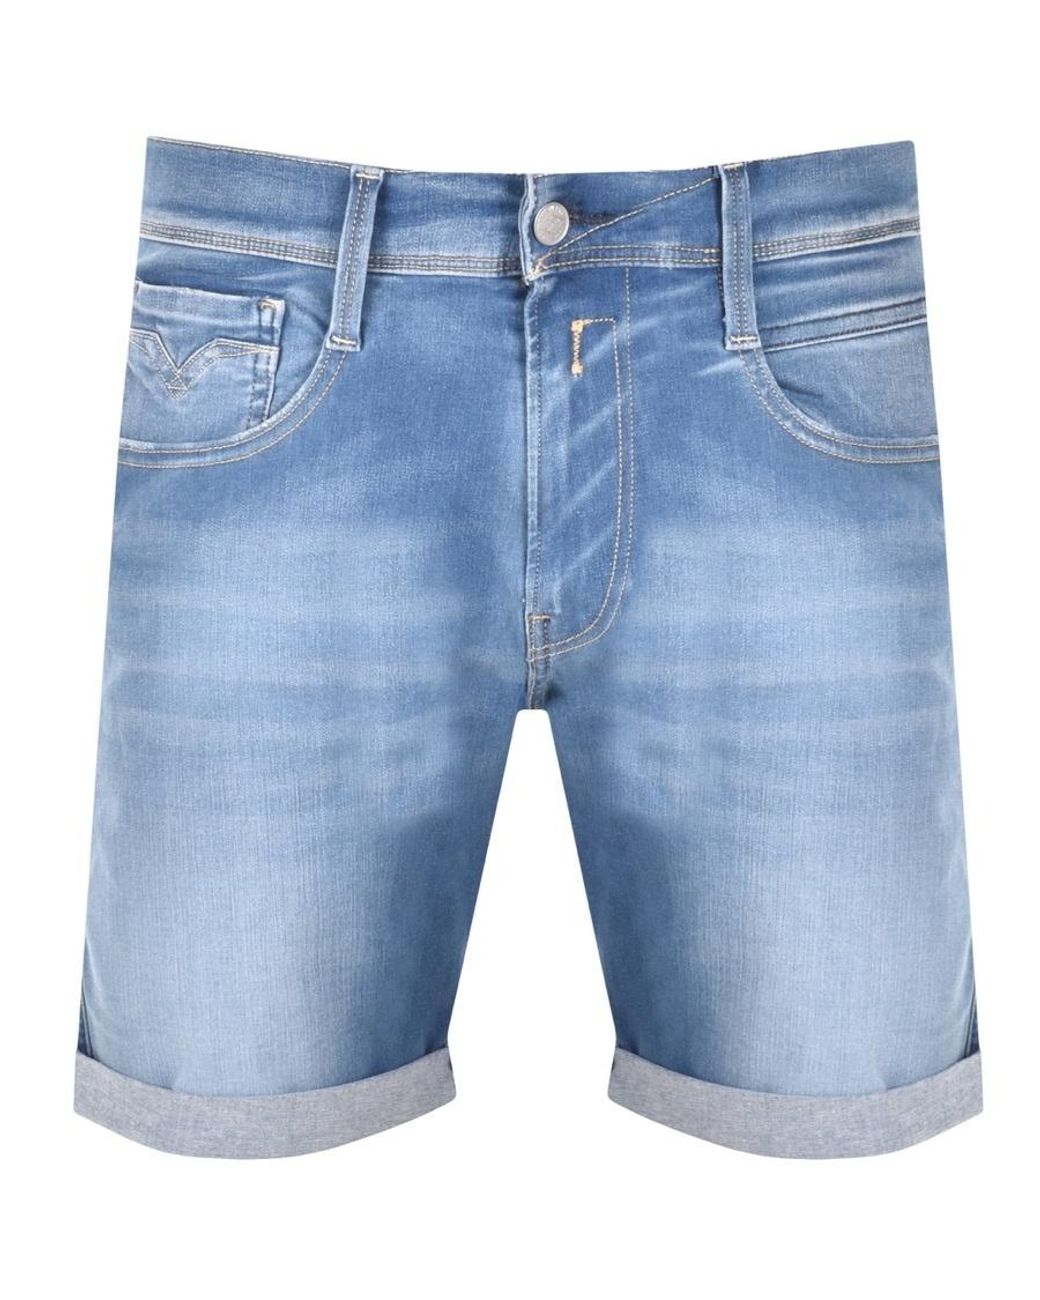 REPLAY MEN'S ANBASS 5 POCKET SHORTS IN ICE BLUE // BNWT // 